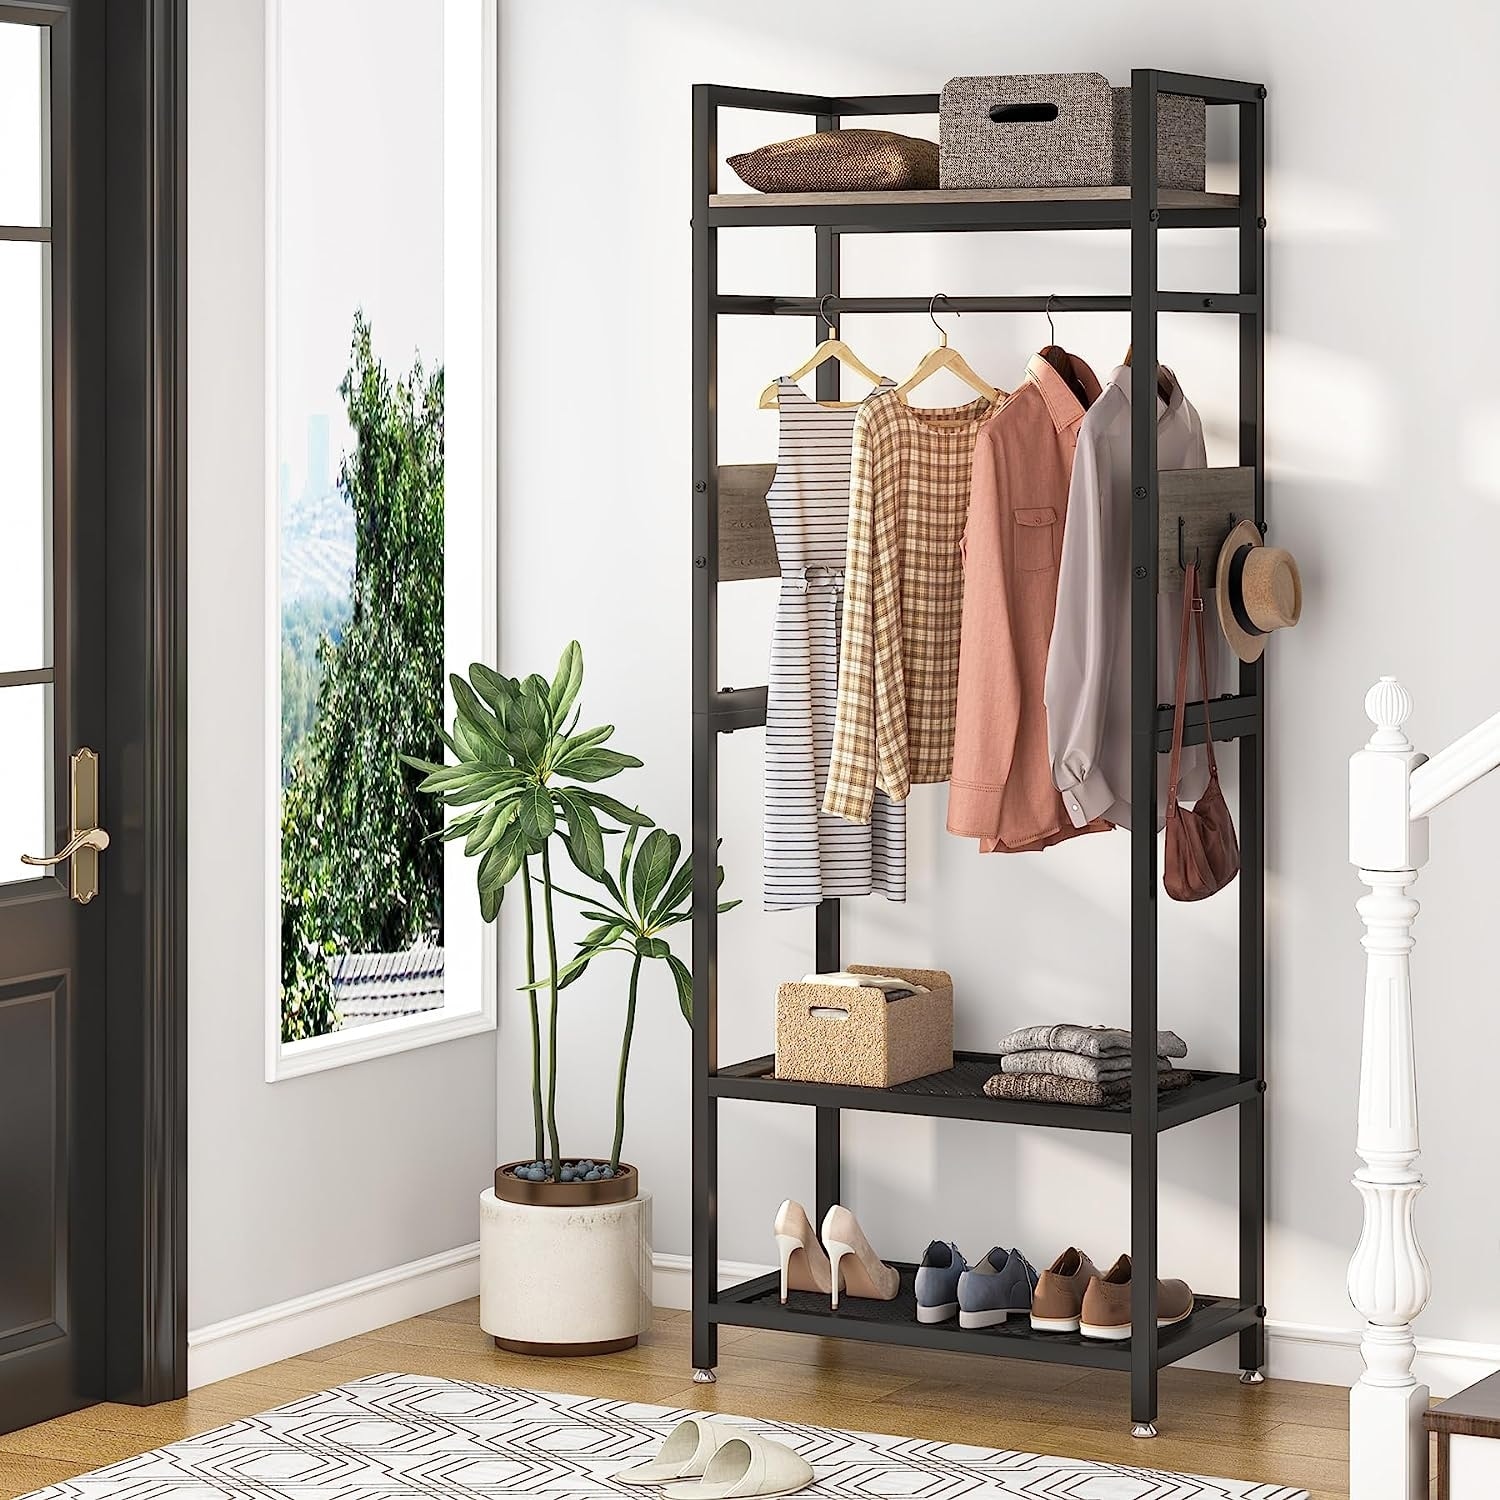 https://ak1.ostkcdn.com/images/products/is/images/direct/f308f91625dbc04fcedeec1fe21c0e7ba1578ecf/Industrial-Entryway-Hall-Tree-with-Shoe-shelves-and-Coat-Hooks%2CSmall-Clothing-Rack.jpg